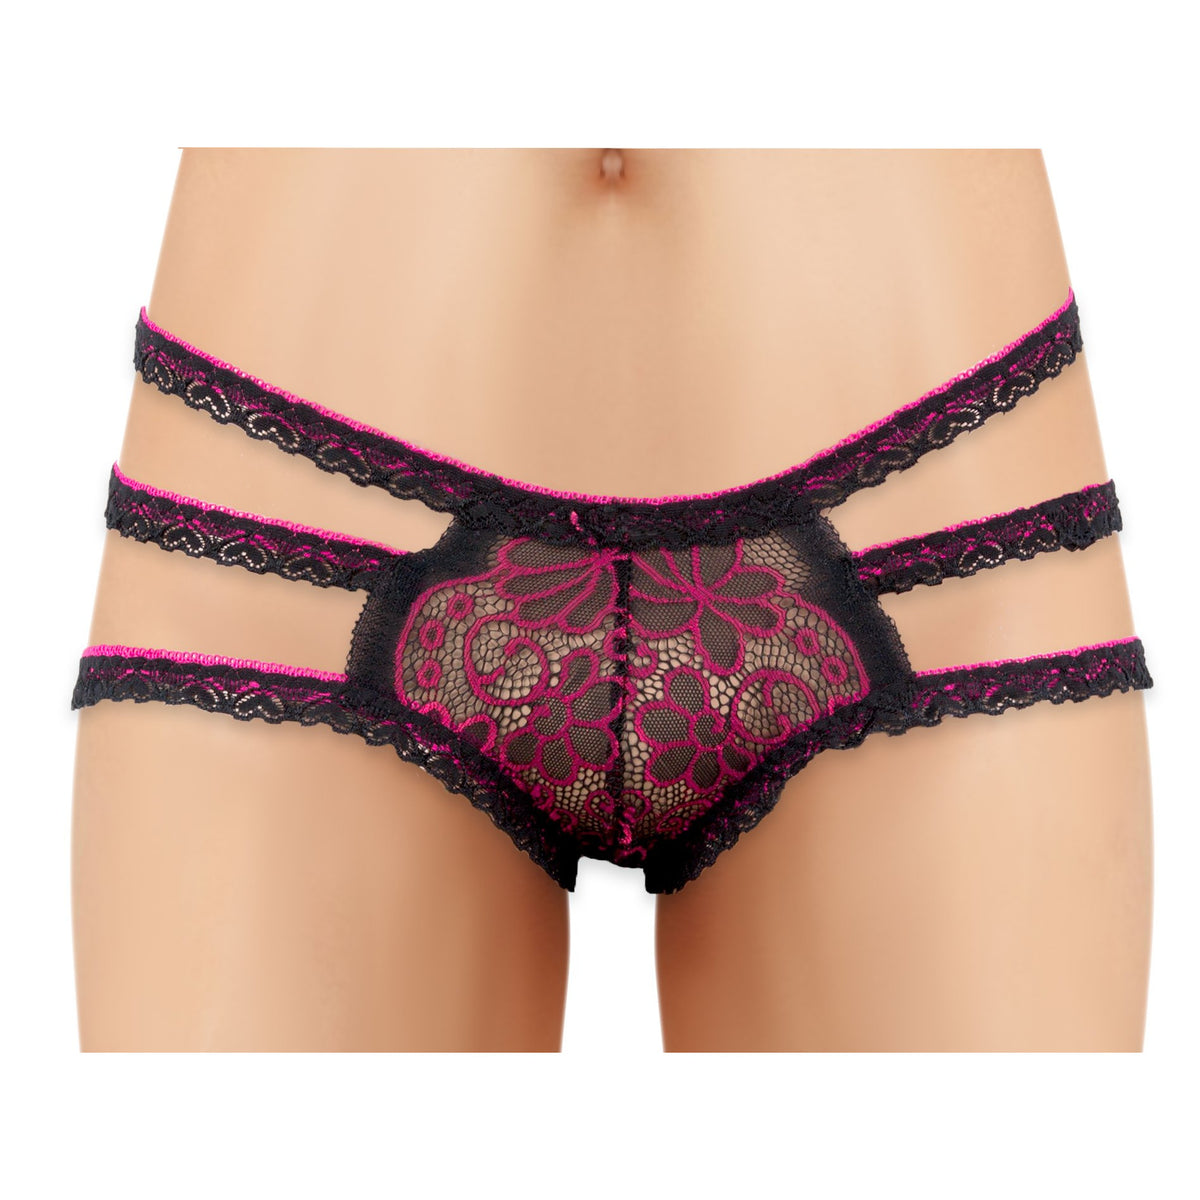 Cherry Wear Lace Panty with Floral Design - Pink - O/S